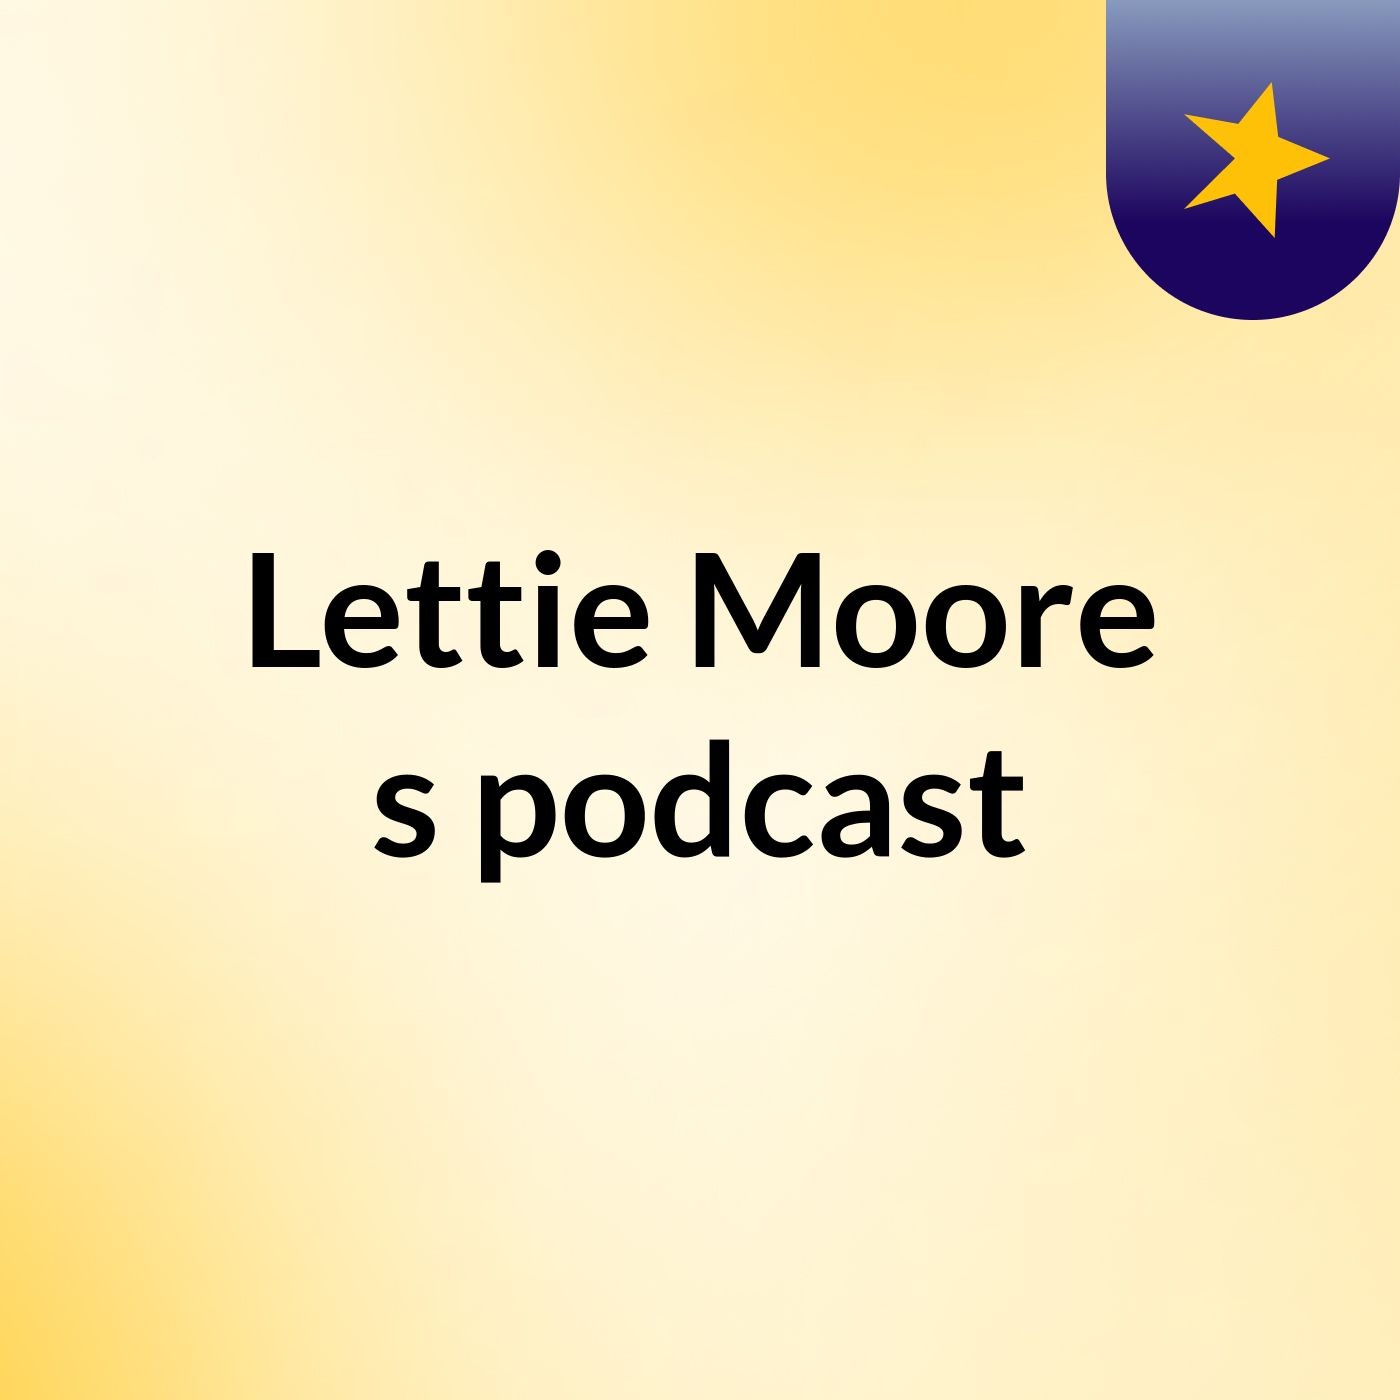 Lettie Moore's podcast